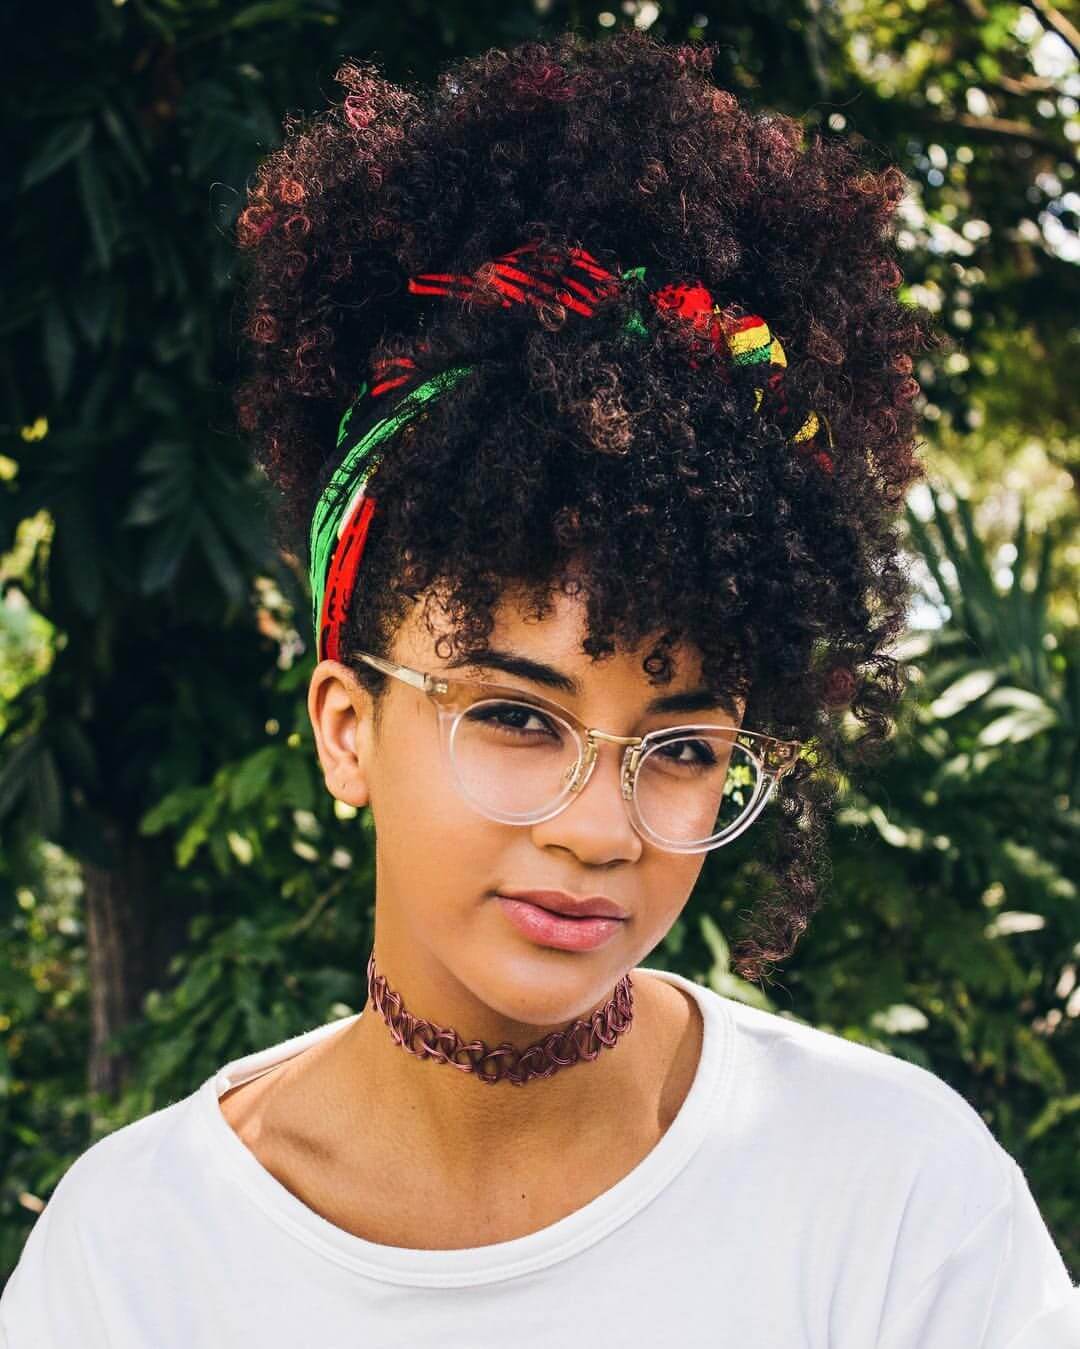 Flaunt Your Curls with These 20 Curly Hairstyles with Bangs